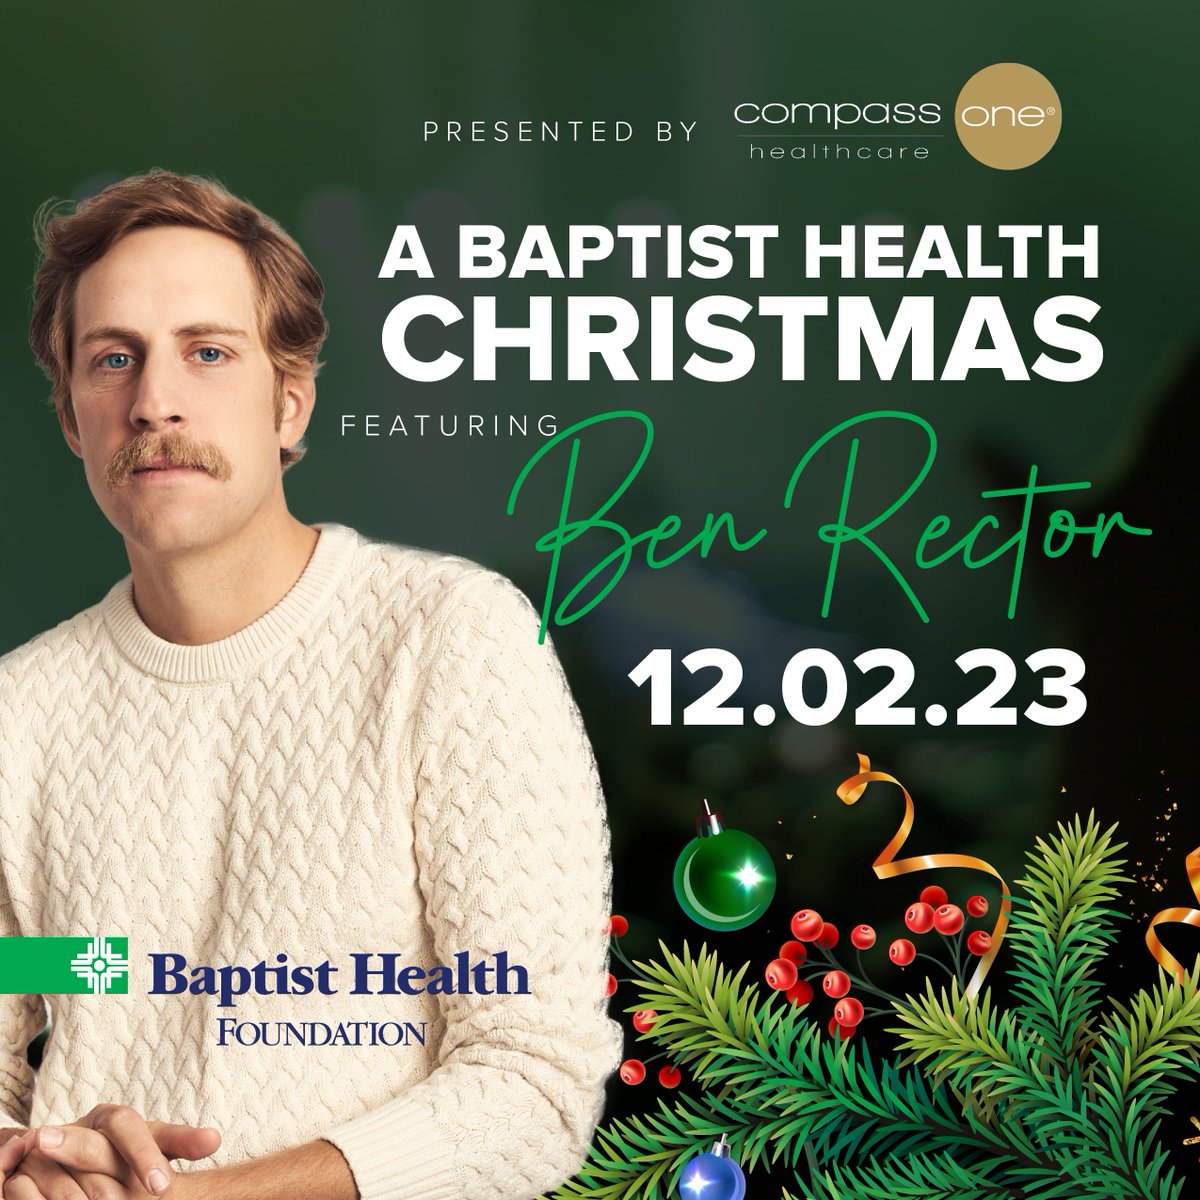 Join us for “A Baptist Health Christmas” hosted by Miss Arkansas Cori Keller, featuring national recording artist Ben Rector. All ticket proceeds will support Baptist Health Women’s and Children’s Services bit.ly/3Mbu9K